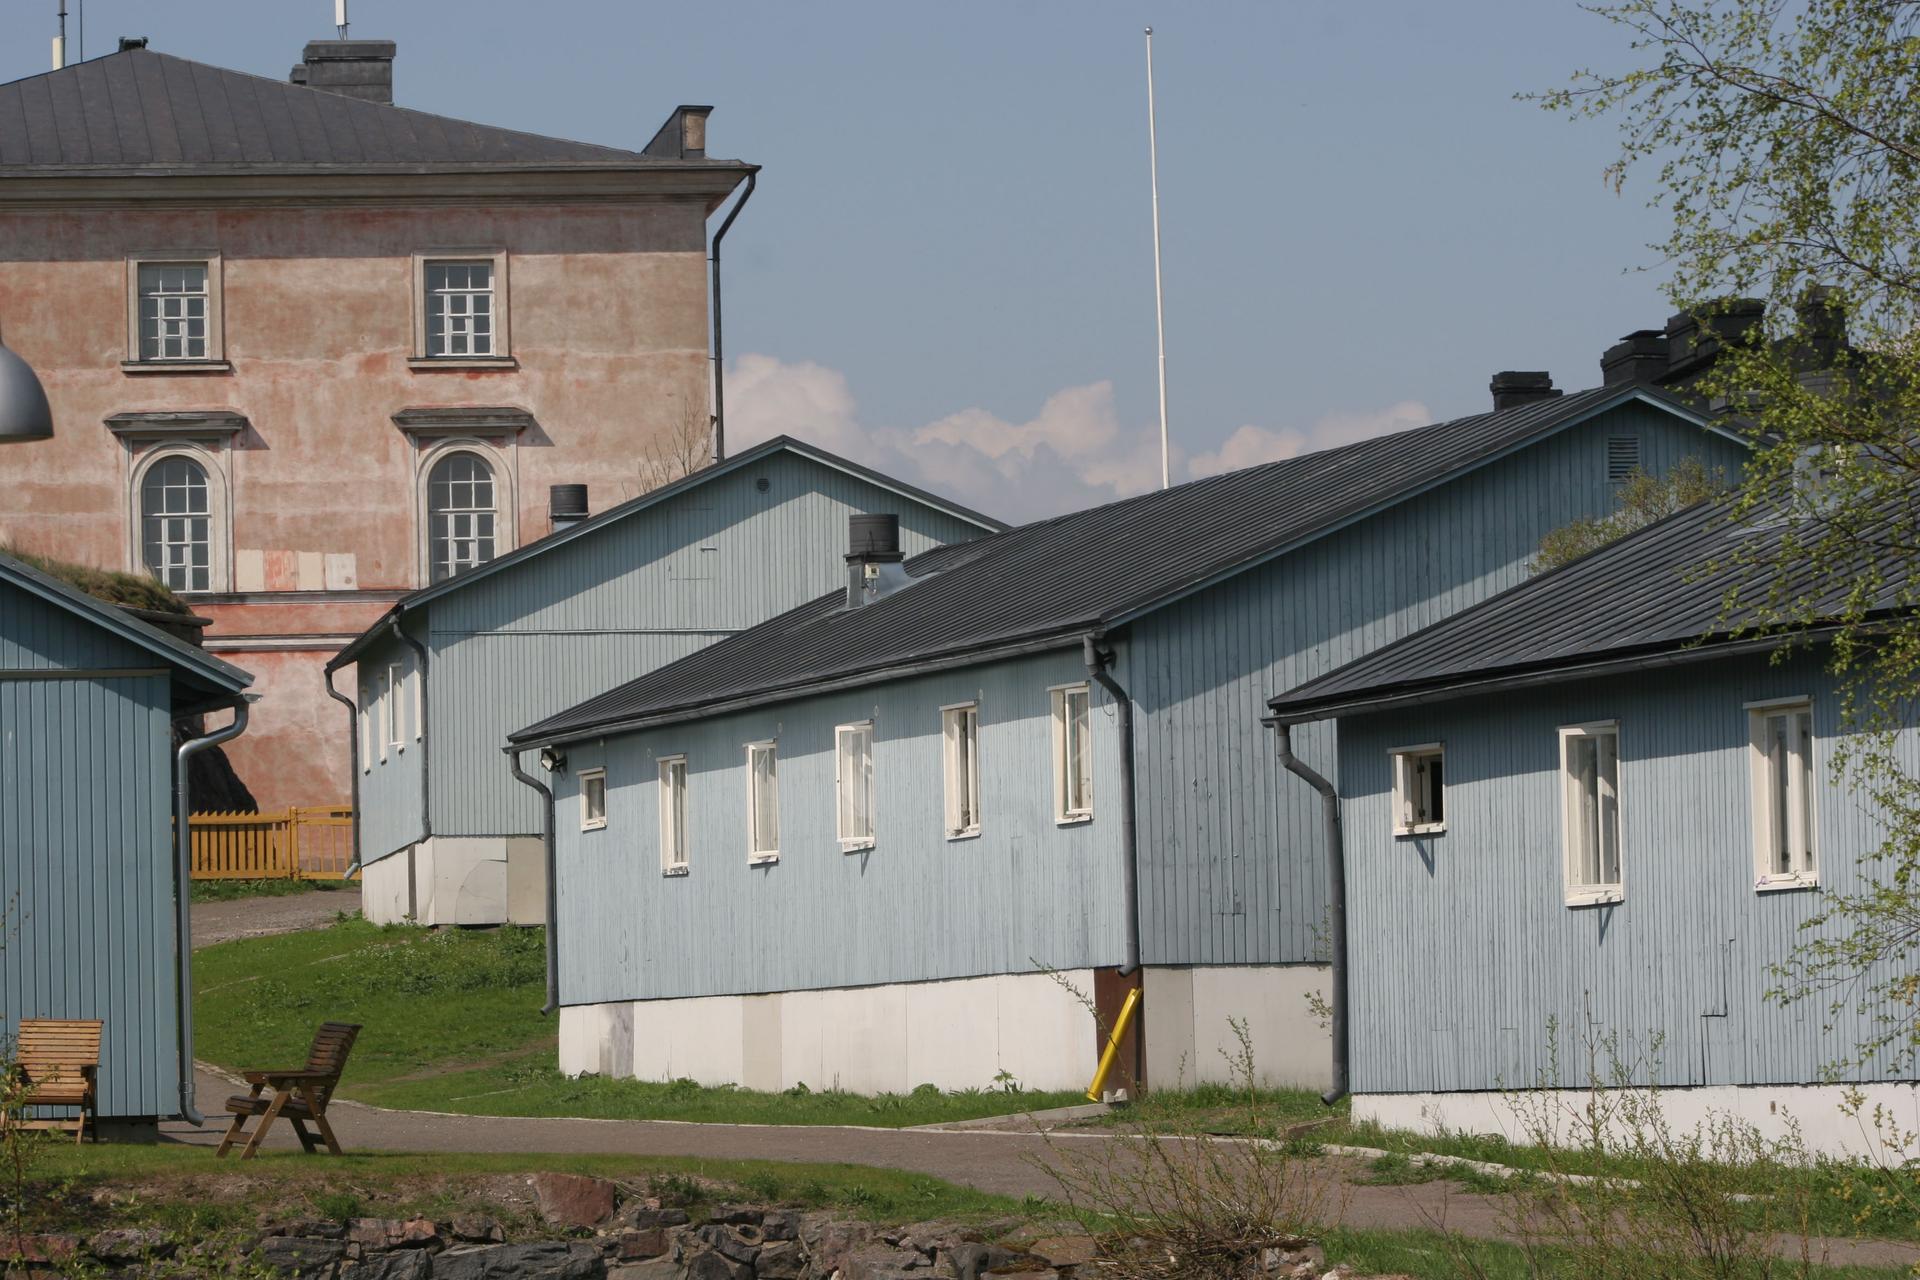 Inmates at the Suomenlinna open prison live in blue dormitory-style housing. A picket fence is all that separates the prison grounds from the rest of the island, a popular tourist destination.